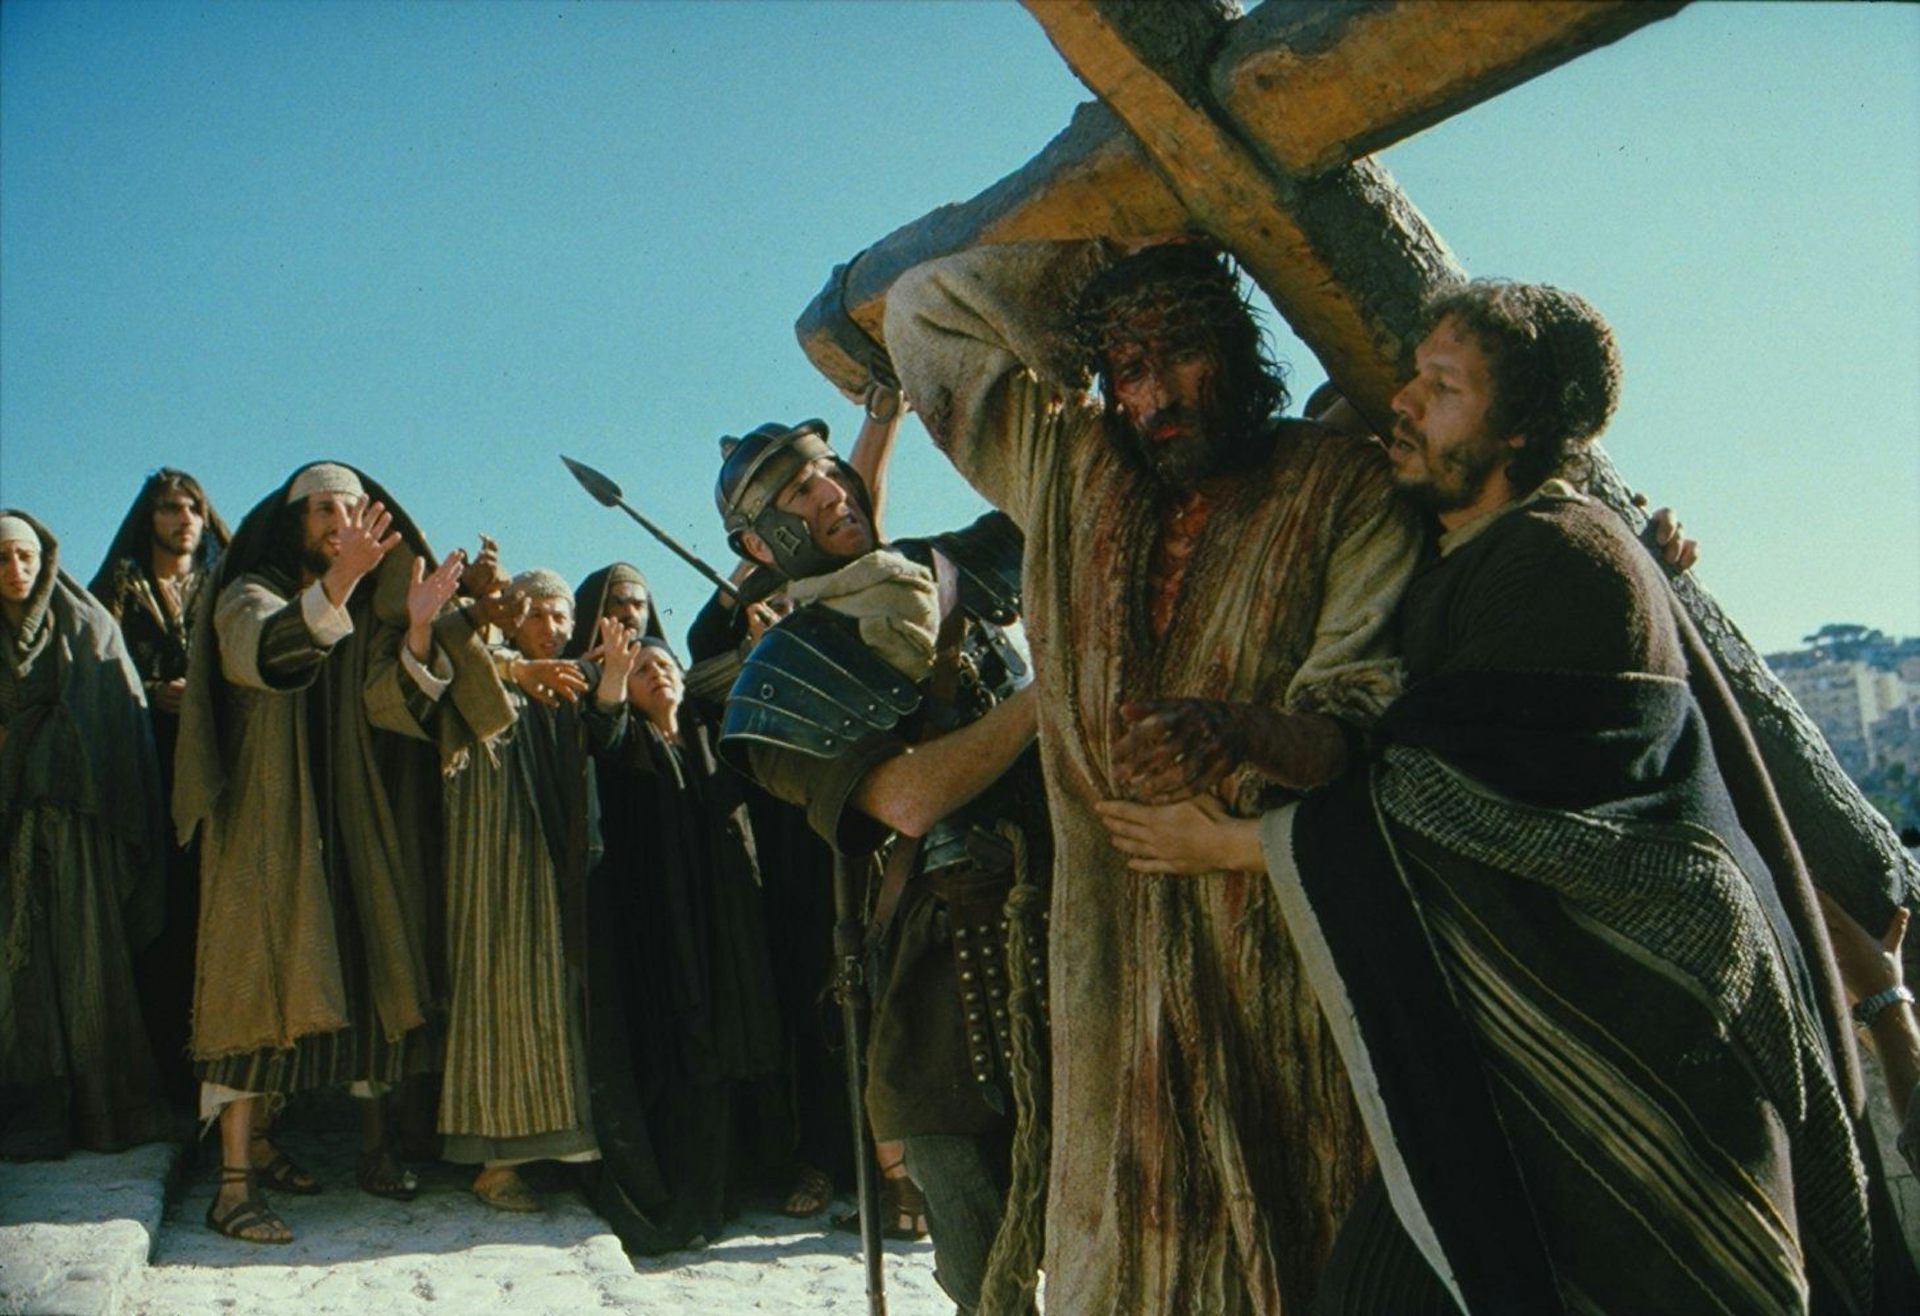 the passion of christ full movie free online